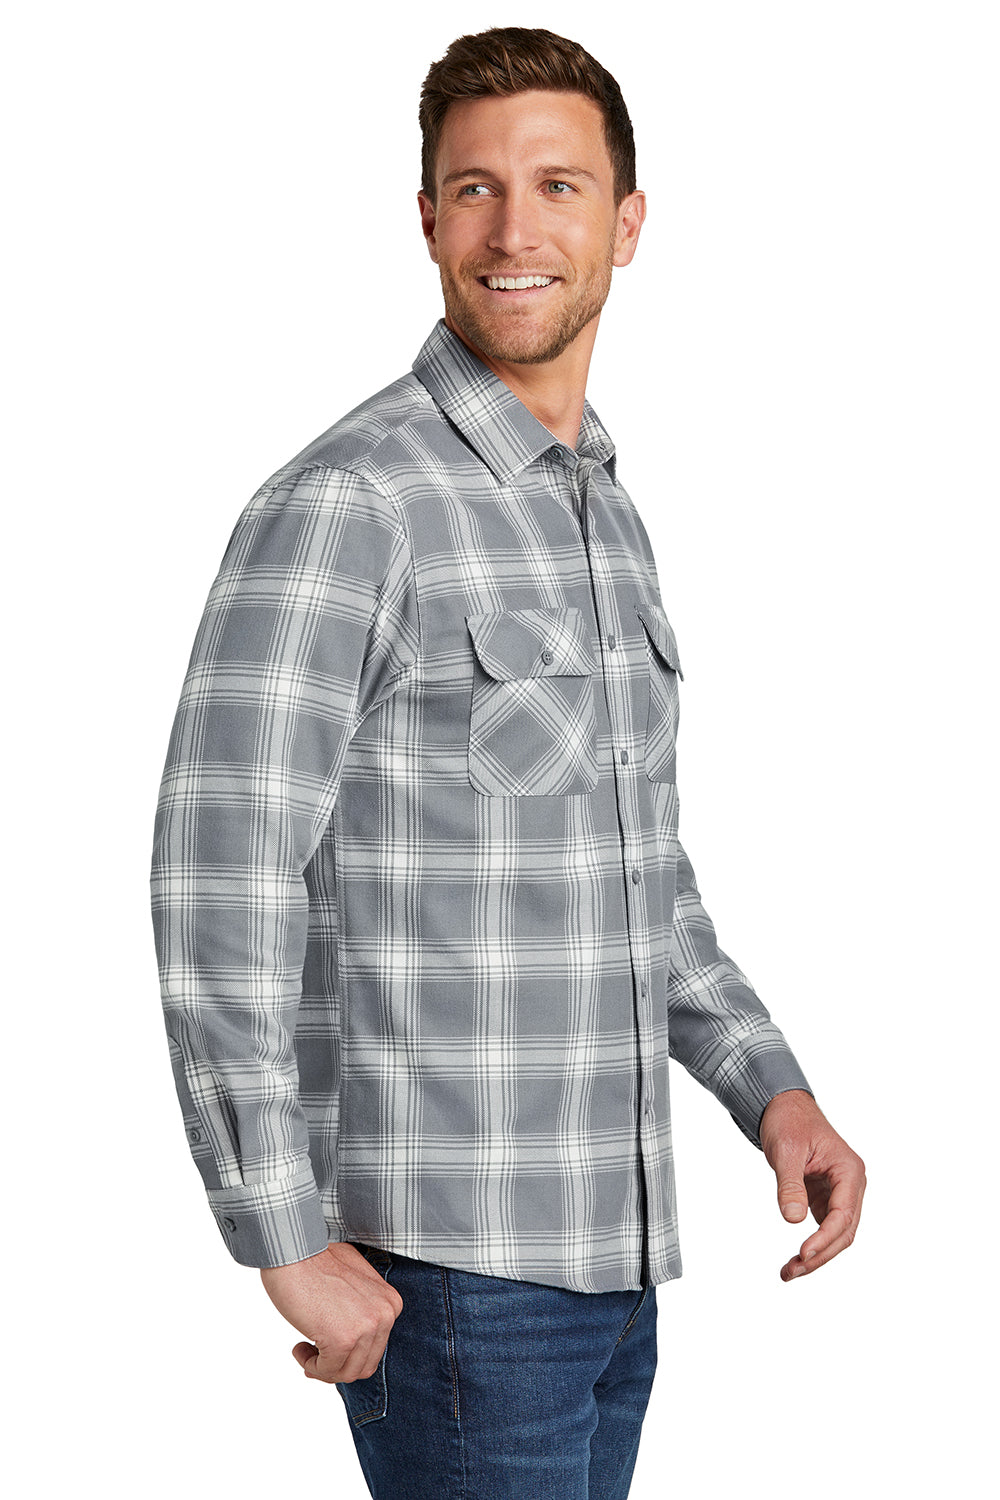 Port Authority W668 Mens Flannel Long Sleeve Button Down Shirt w/ Double Pockets Grey/Cream Plaid SIde